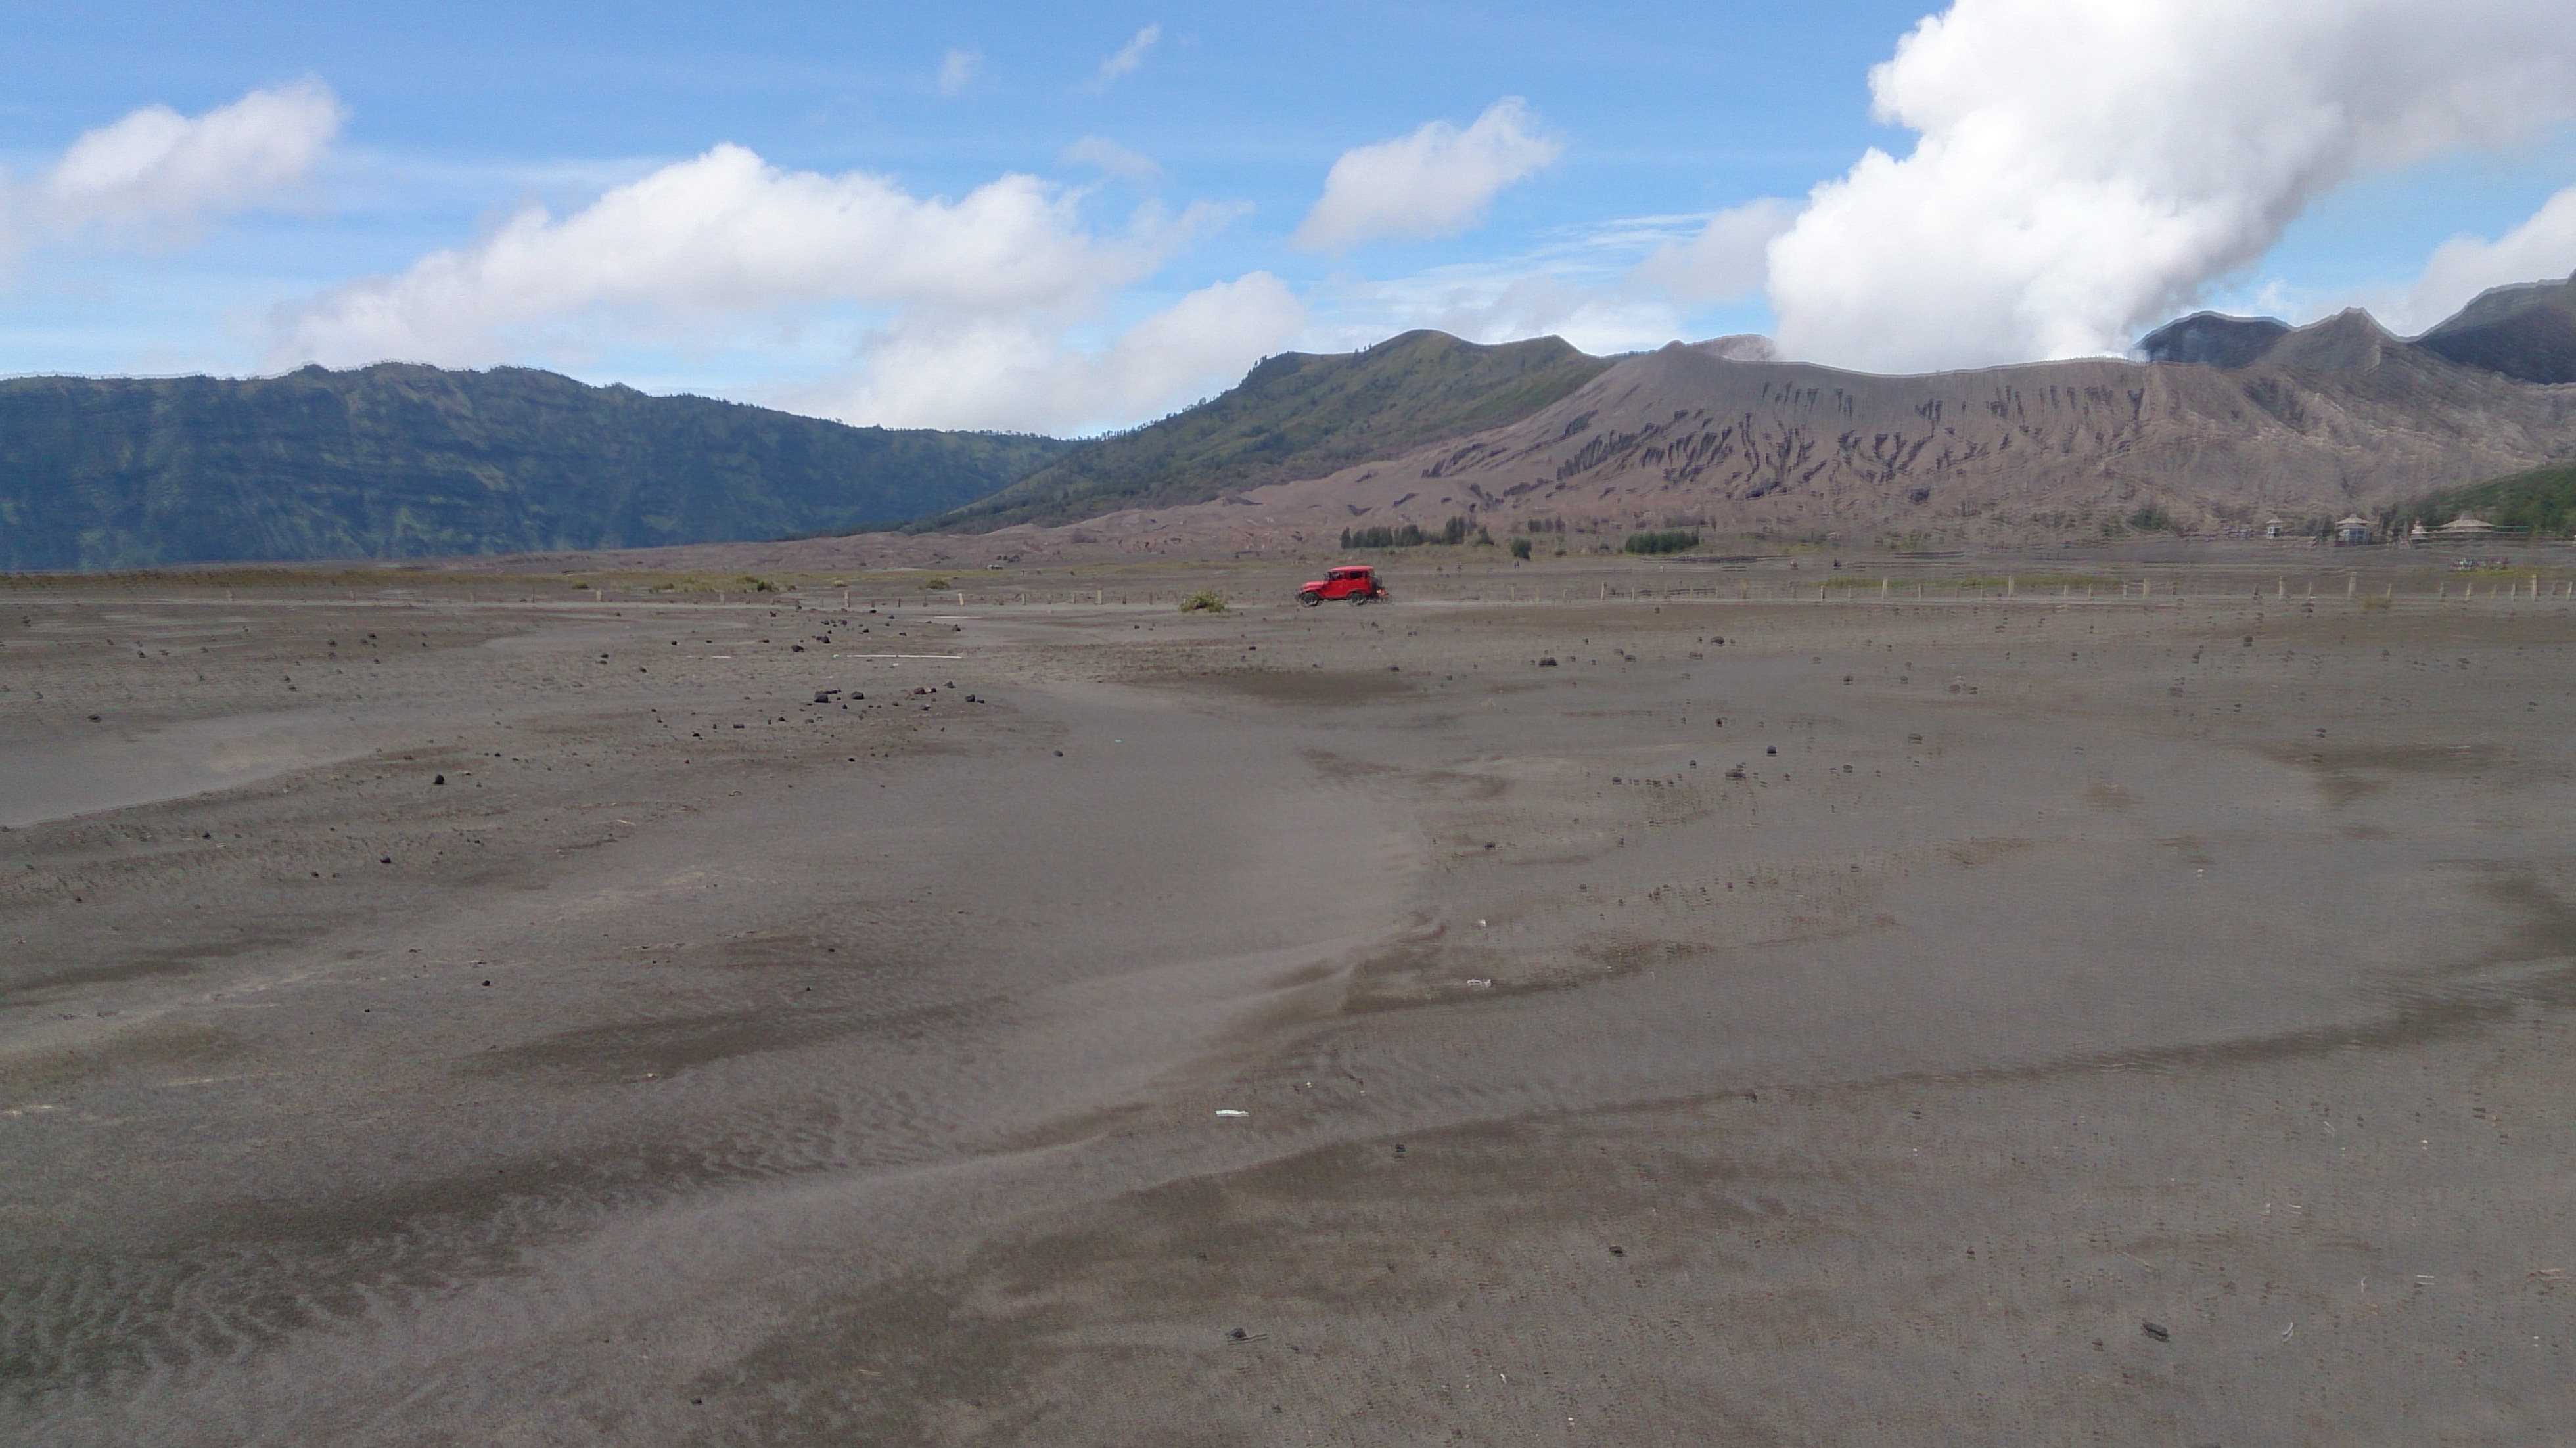 sea of sand by mt bromo